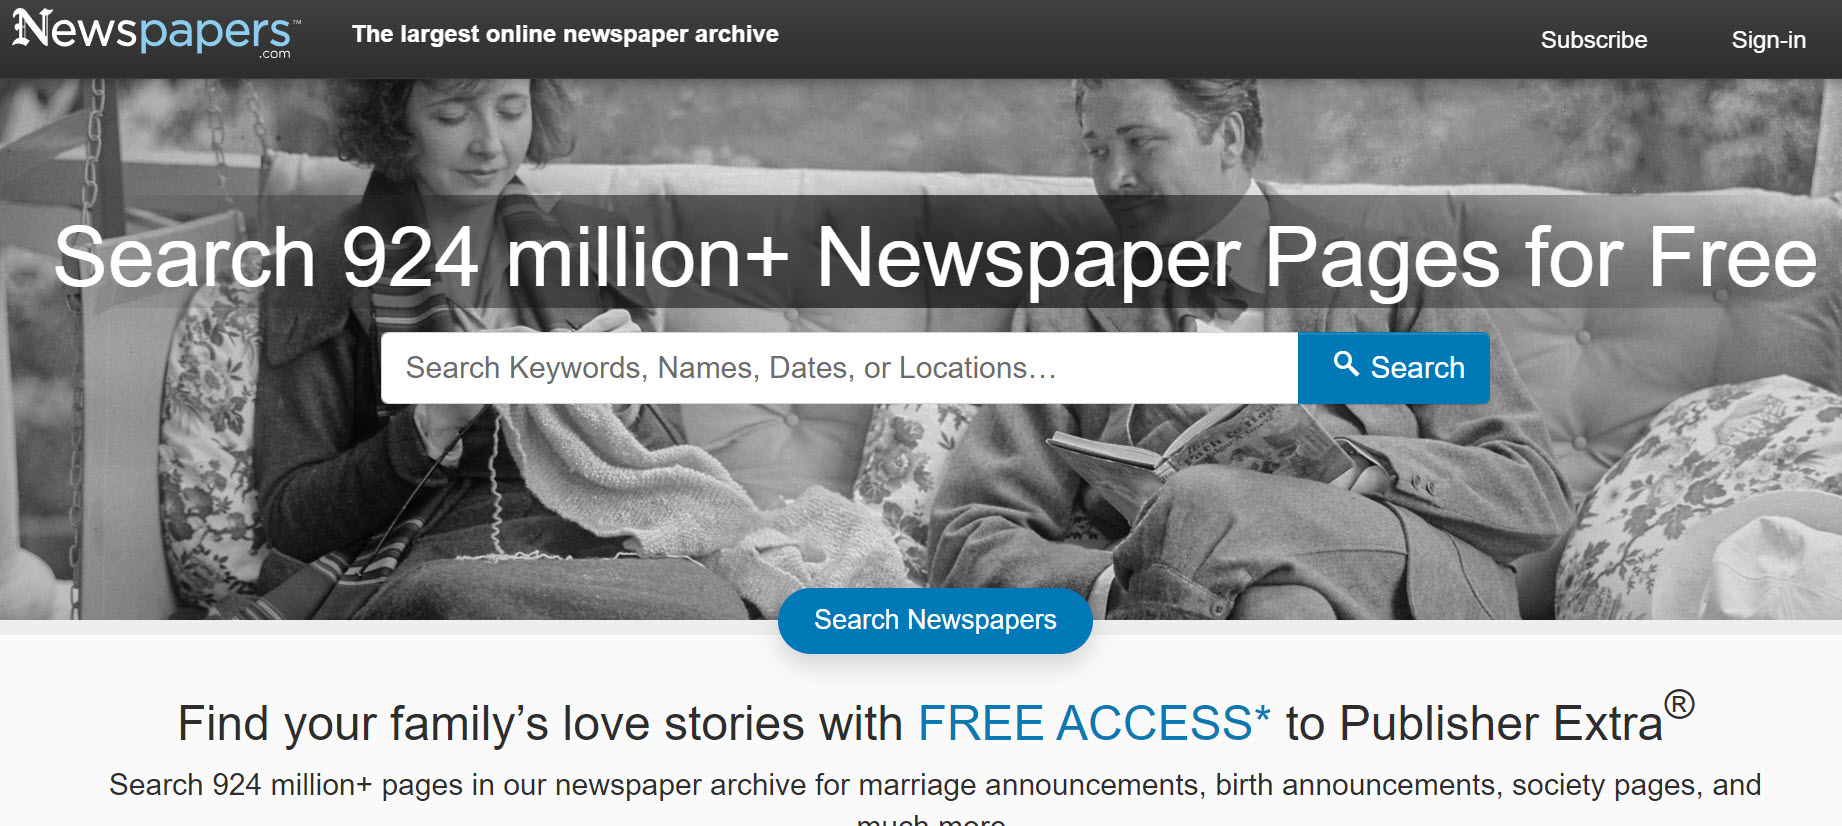 FREE ACCESS Historical Newspaper Archive! Search Over 924 MILLION Pages at Newspapers.com!